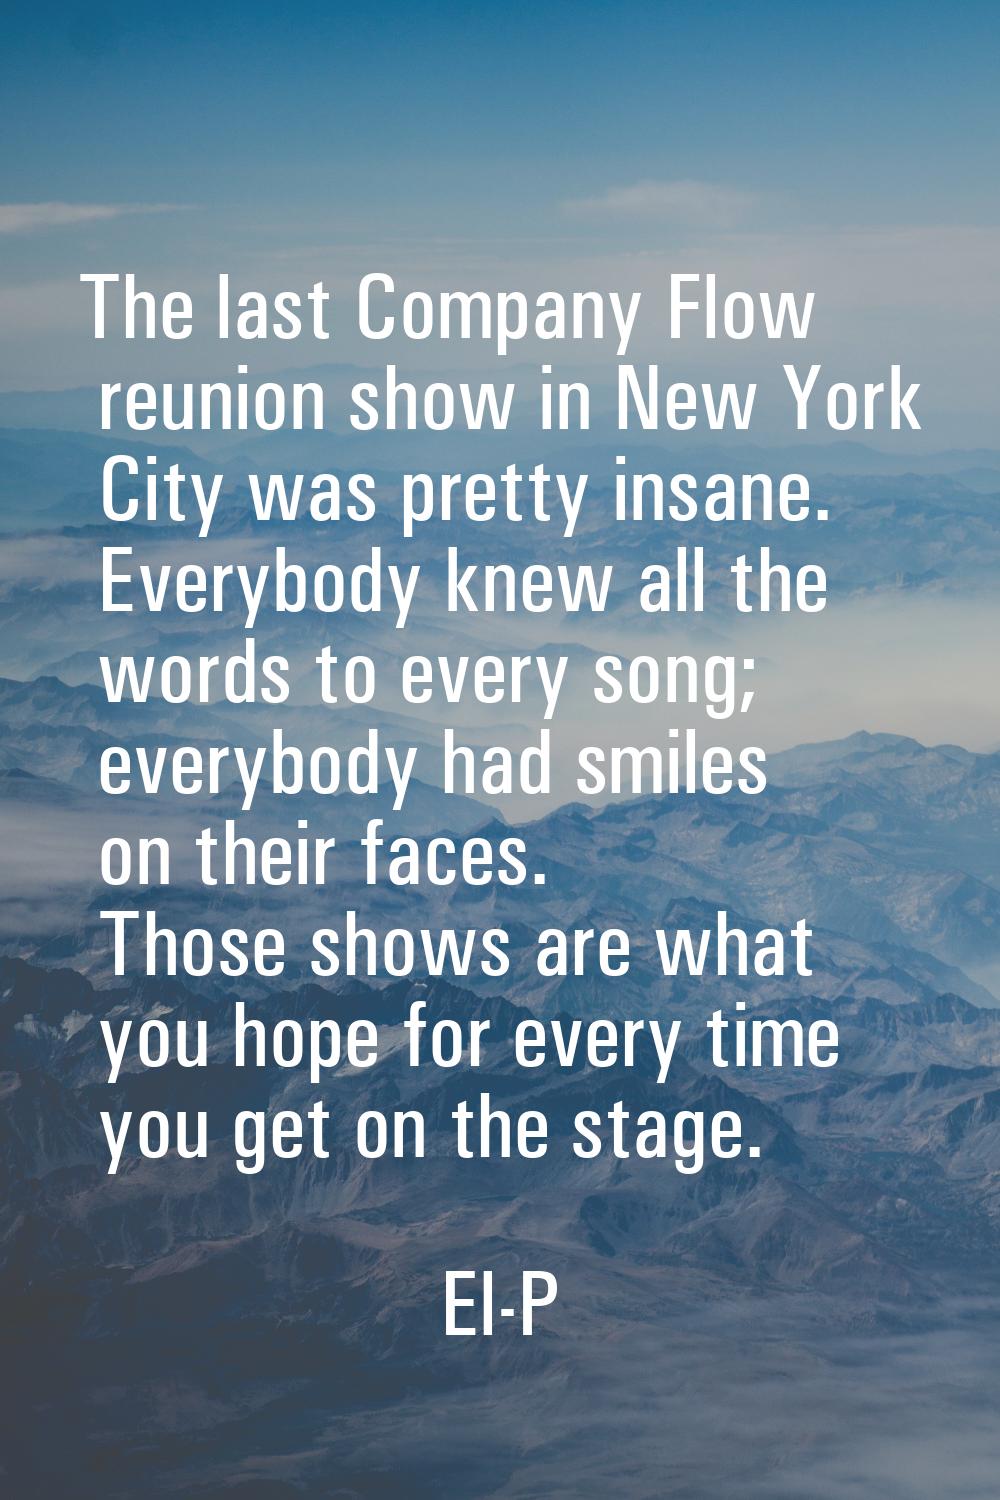 The last Company Flow reunion show in New York City was pretty insane. Everybody knew all the words